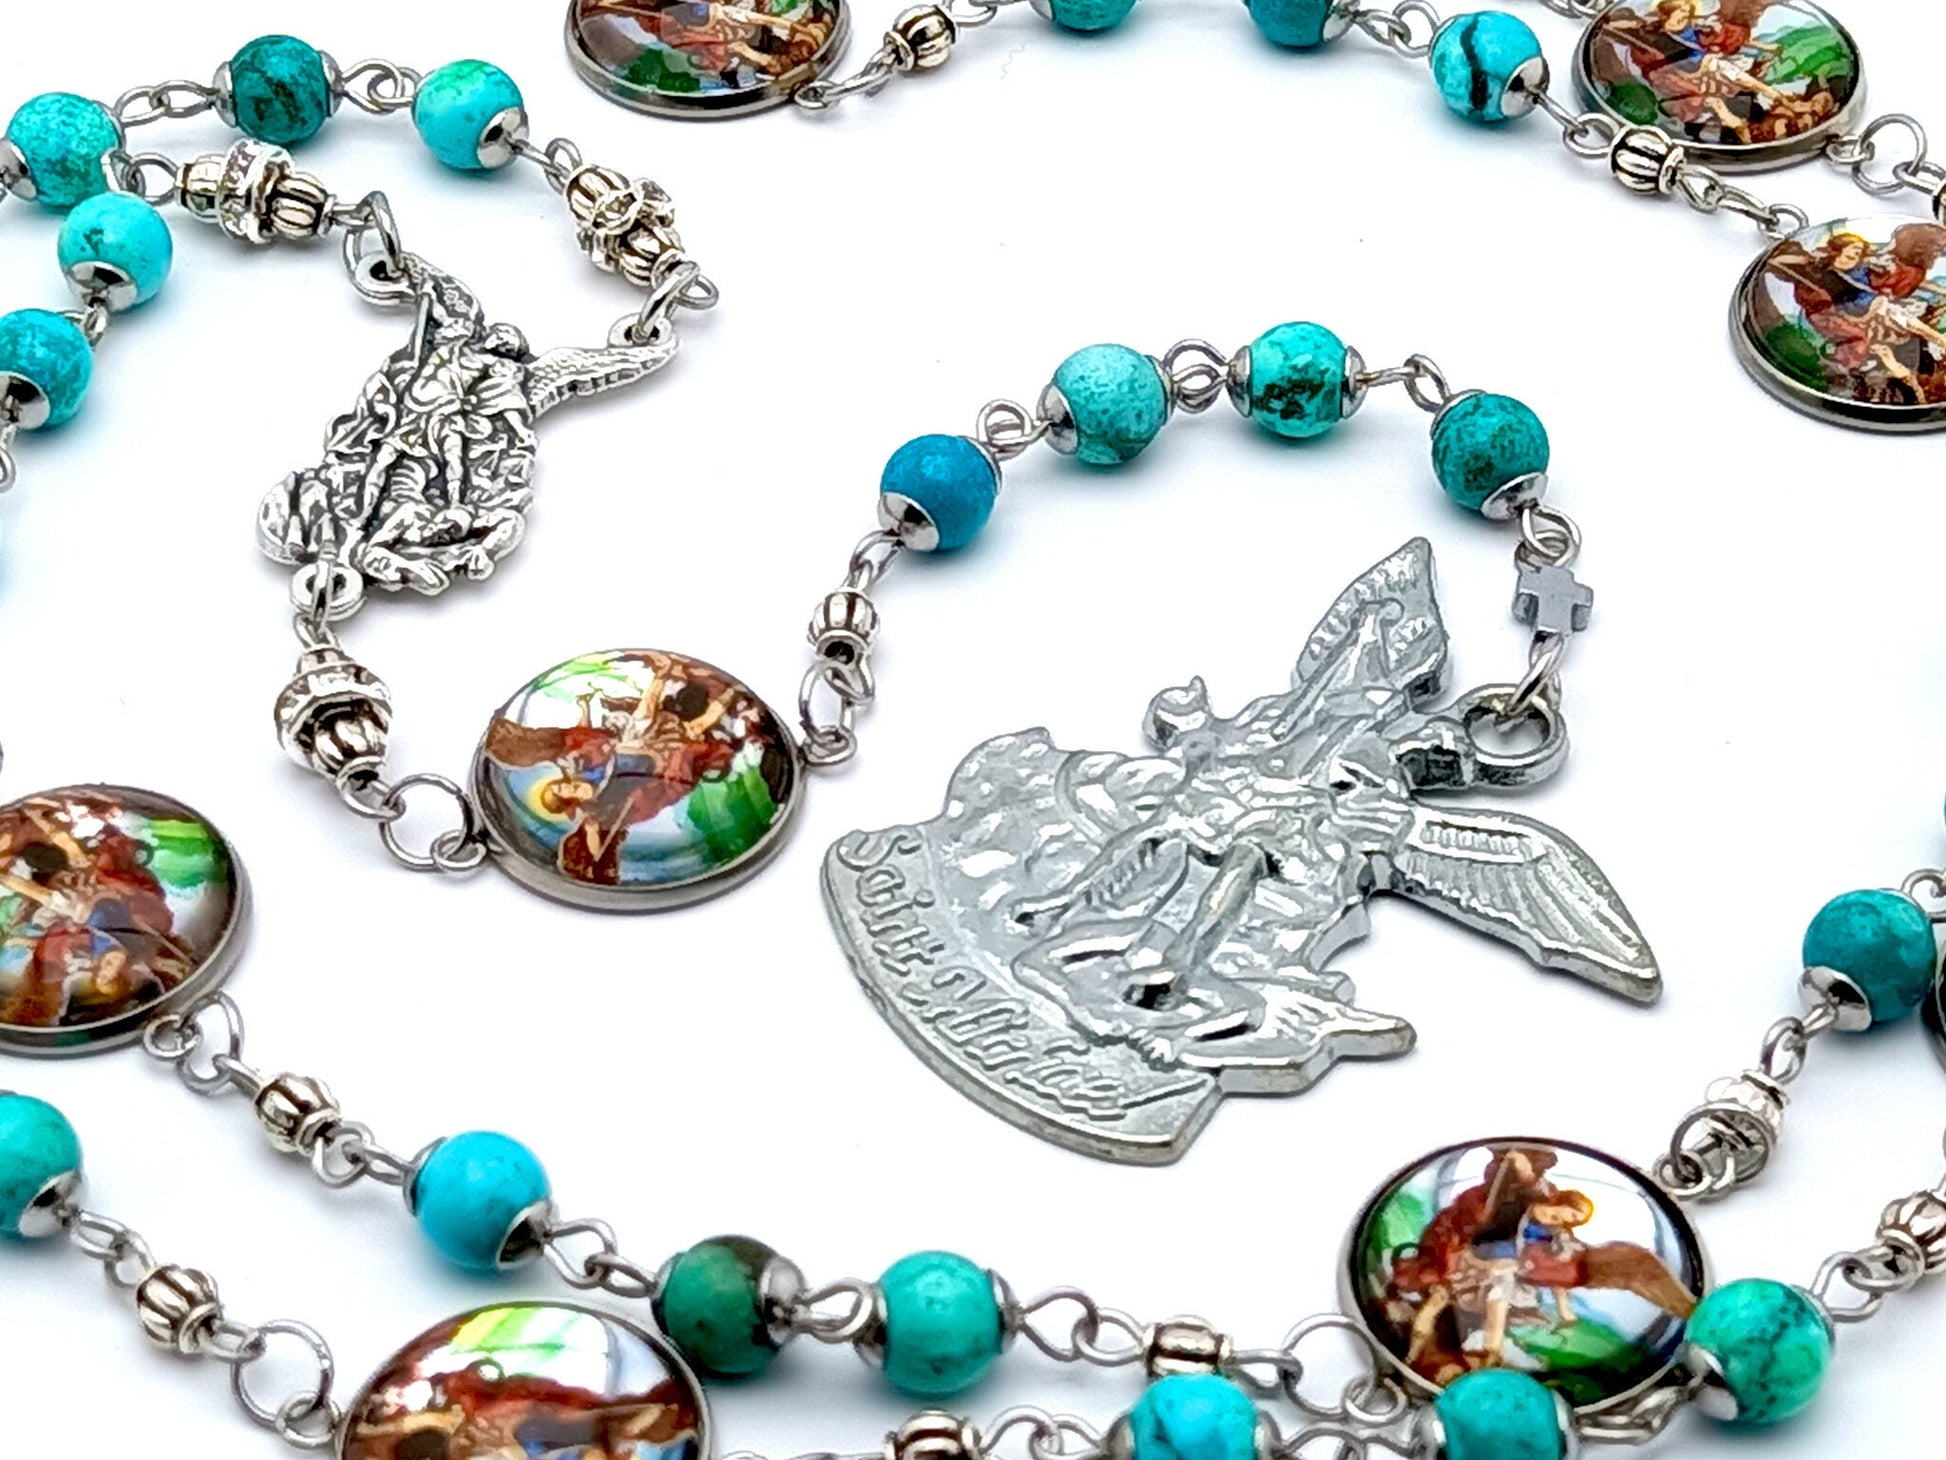 Saint Michael unique rosary beads prayer chaplet with turquoise gemstone and picture medal beads, silver centre and end medals